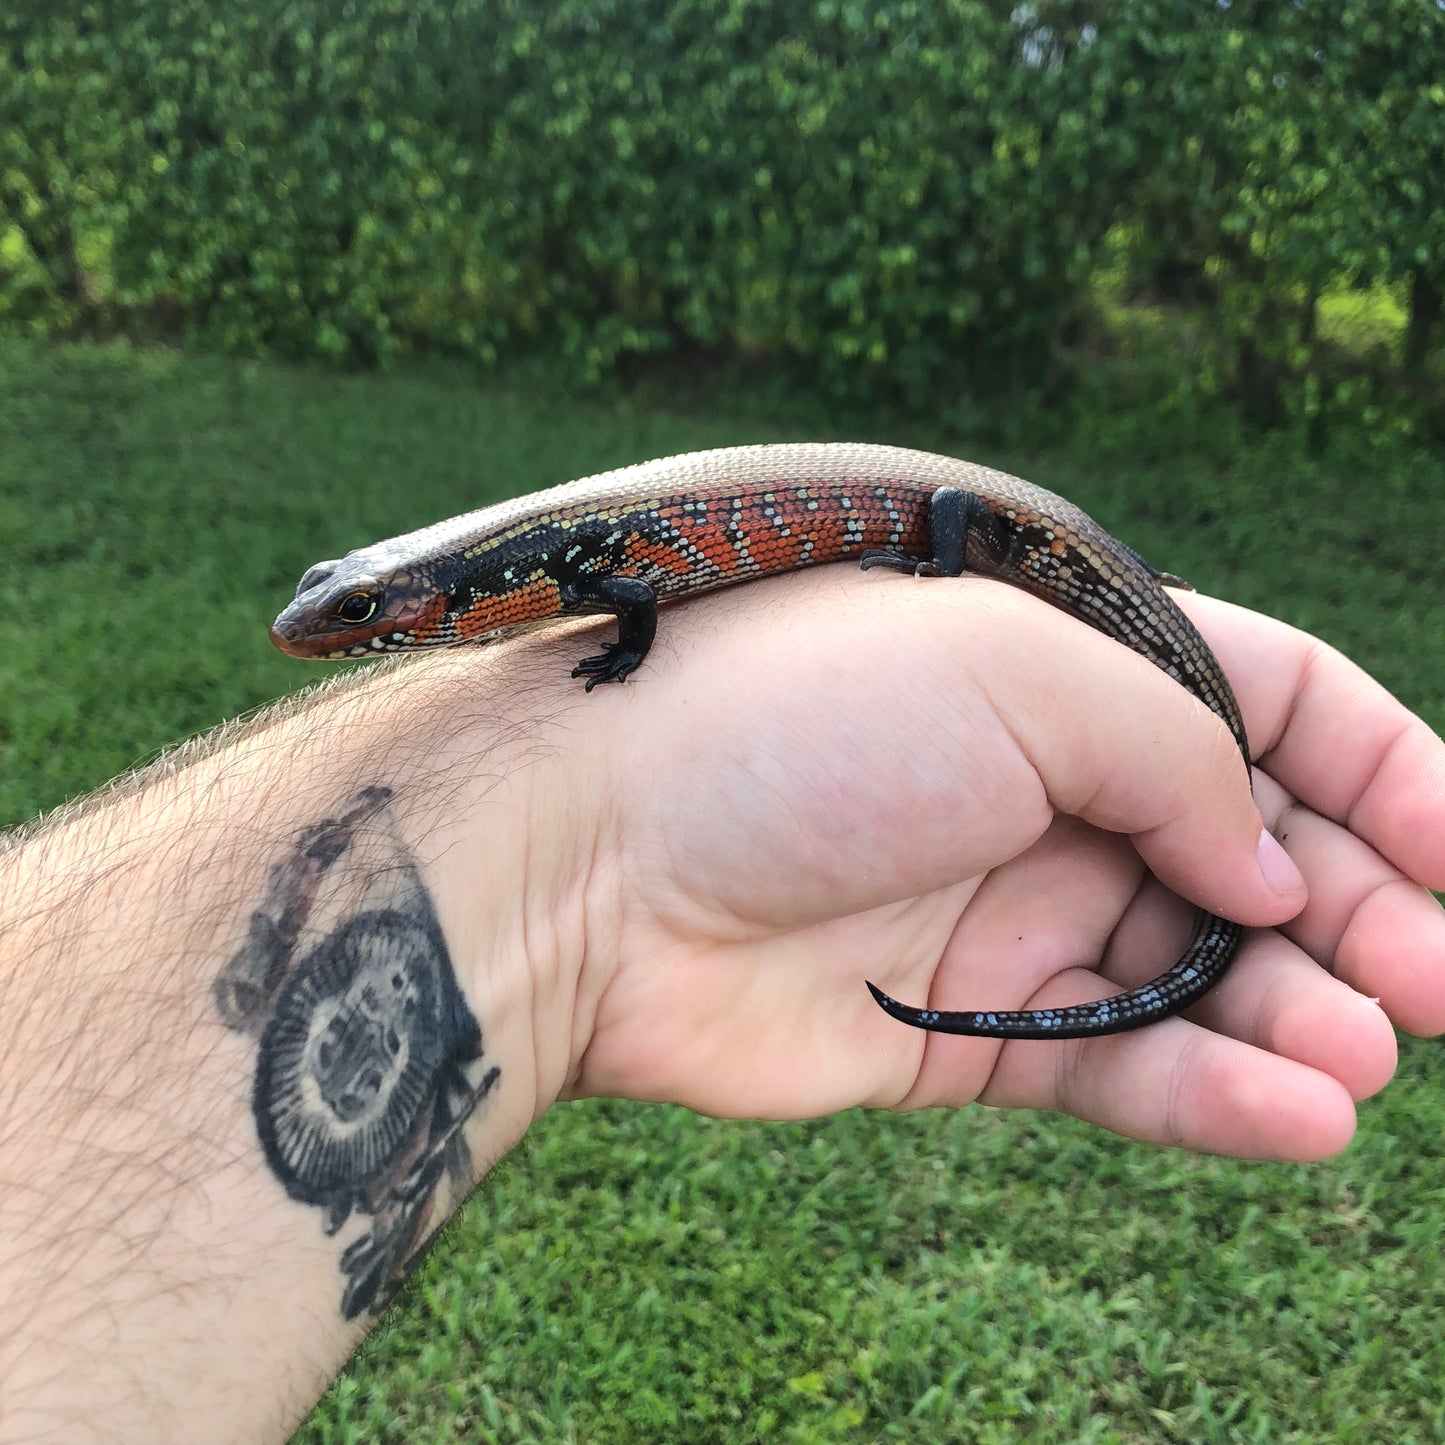 African Fire Skink